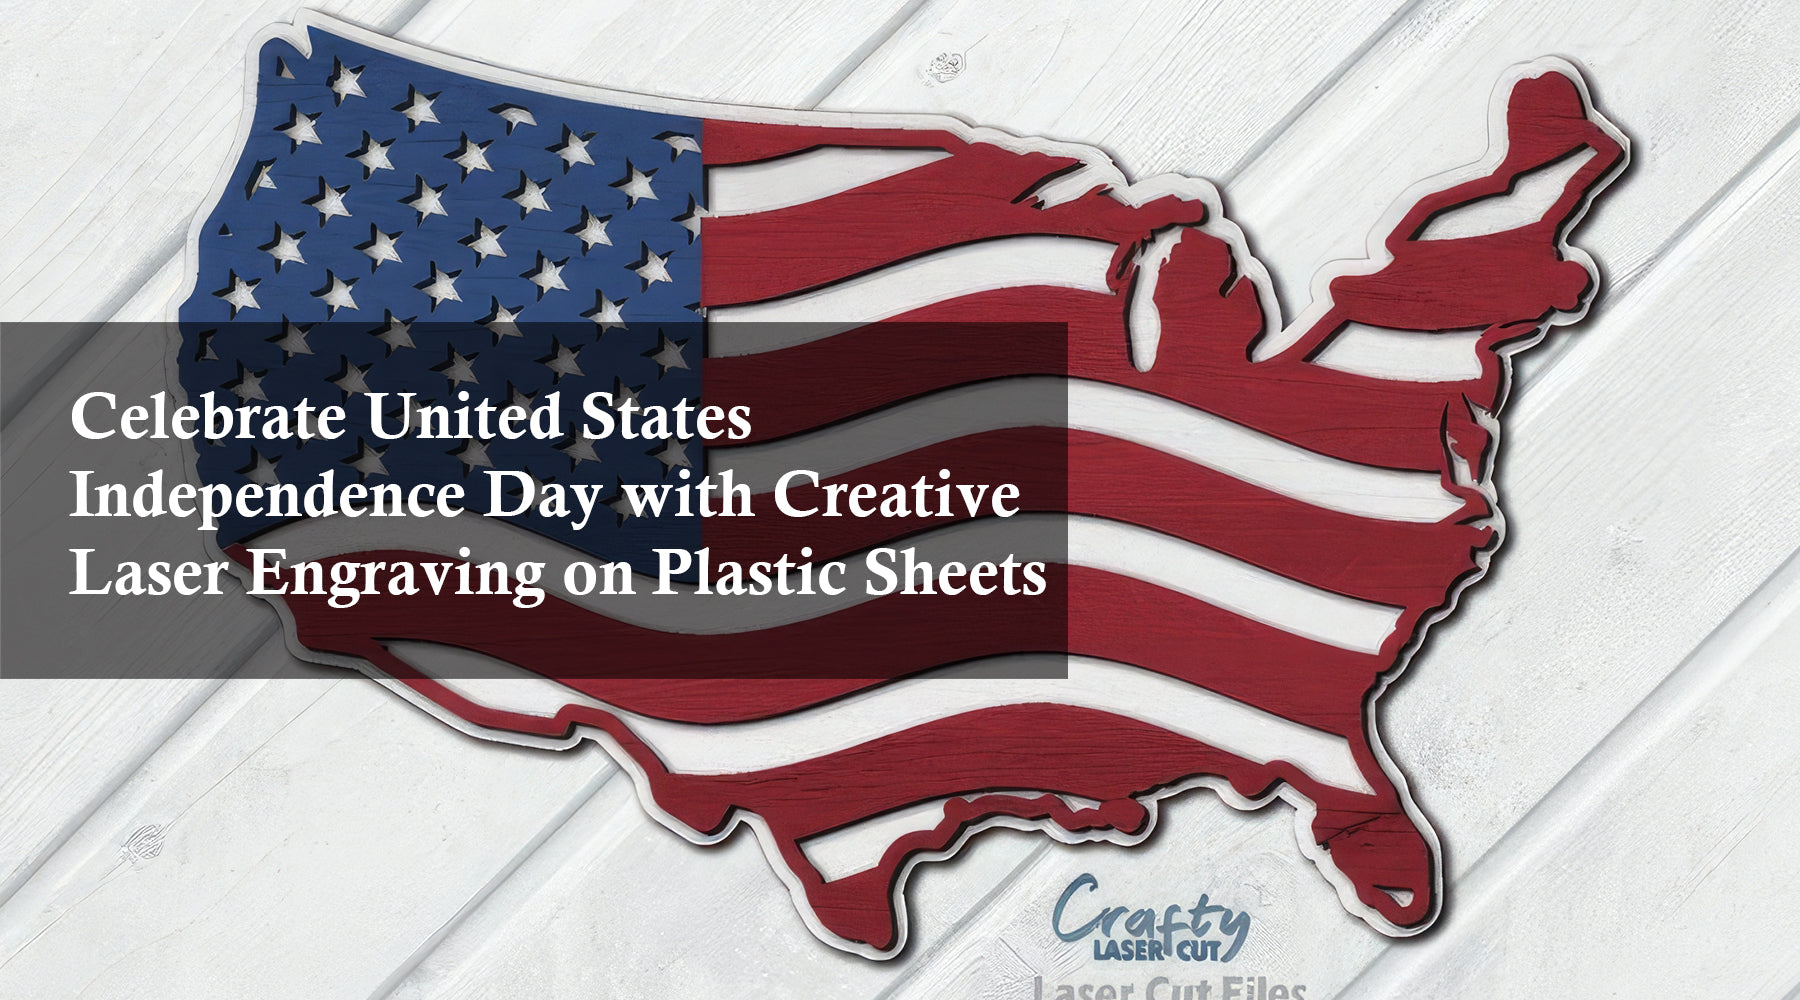 Celebrate United States Independence Day with Creative Laser Engraving on Plastic Sheets